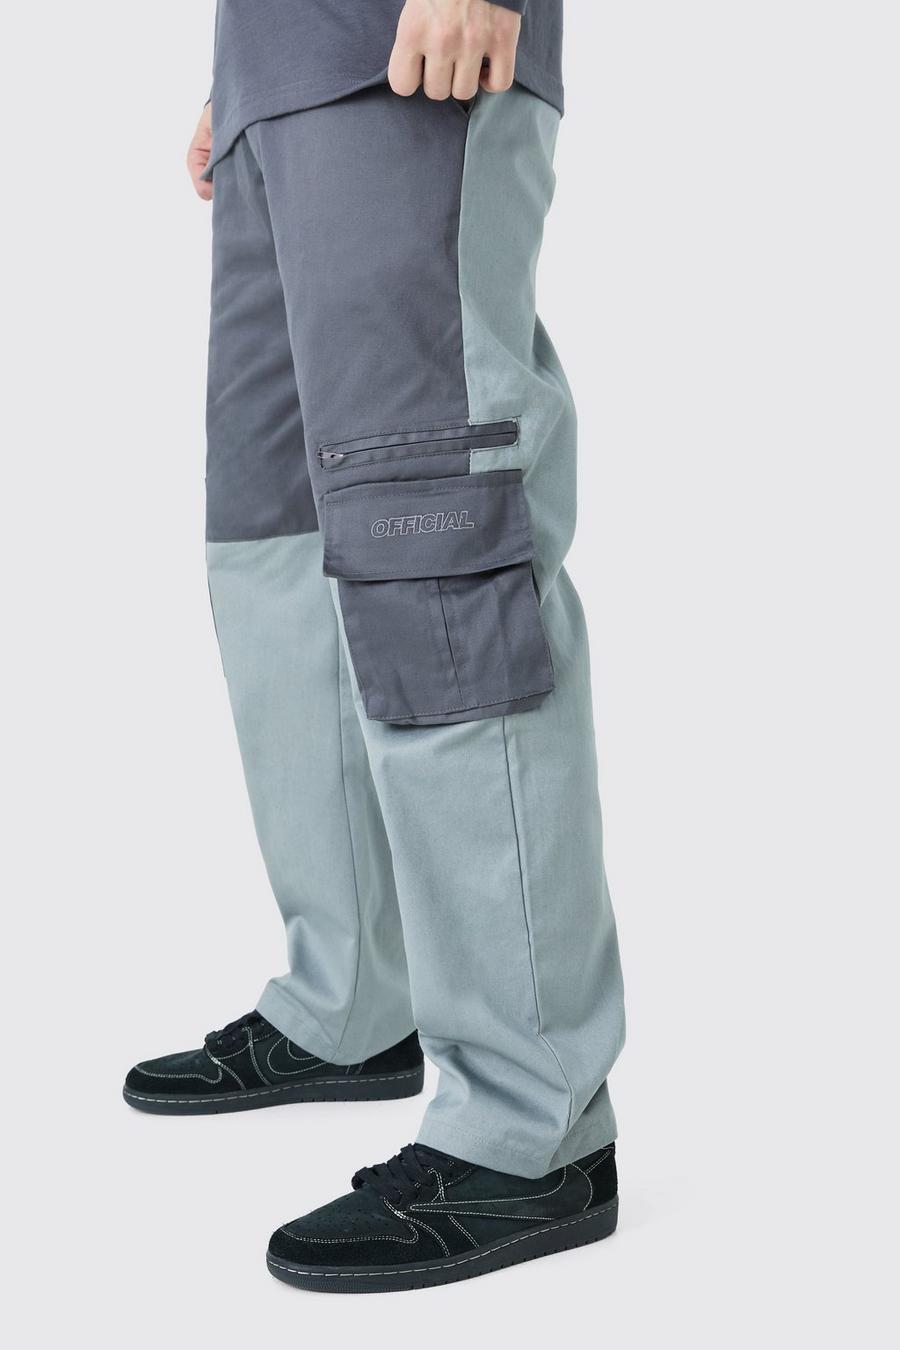 Tall lockere Colorblock Cargo-Hose mit Official-Logo, Charcoal